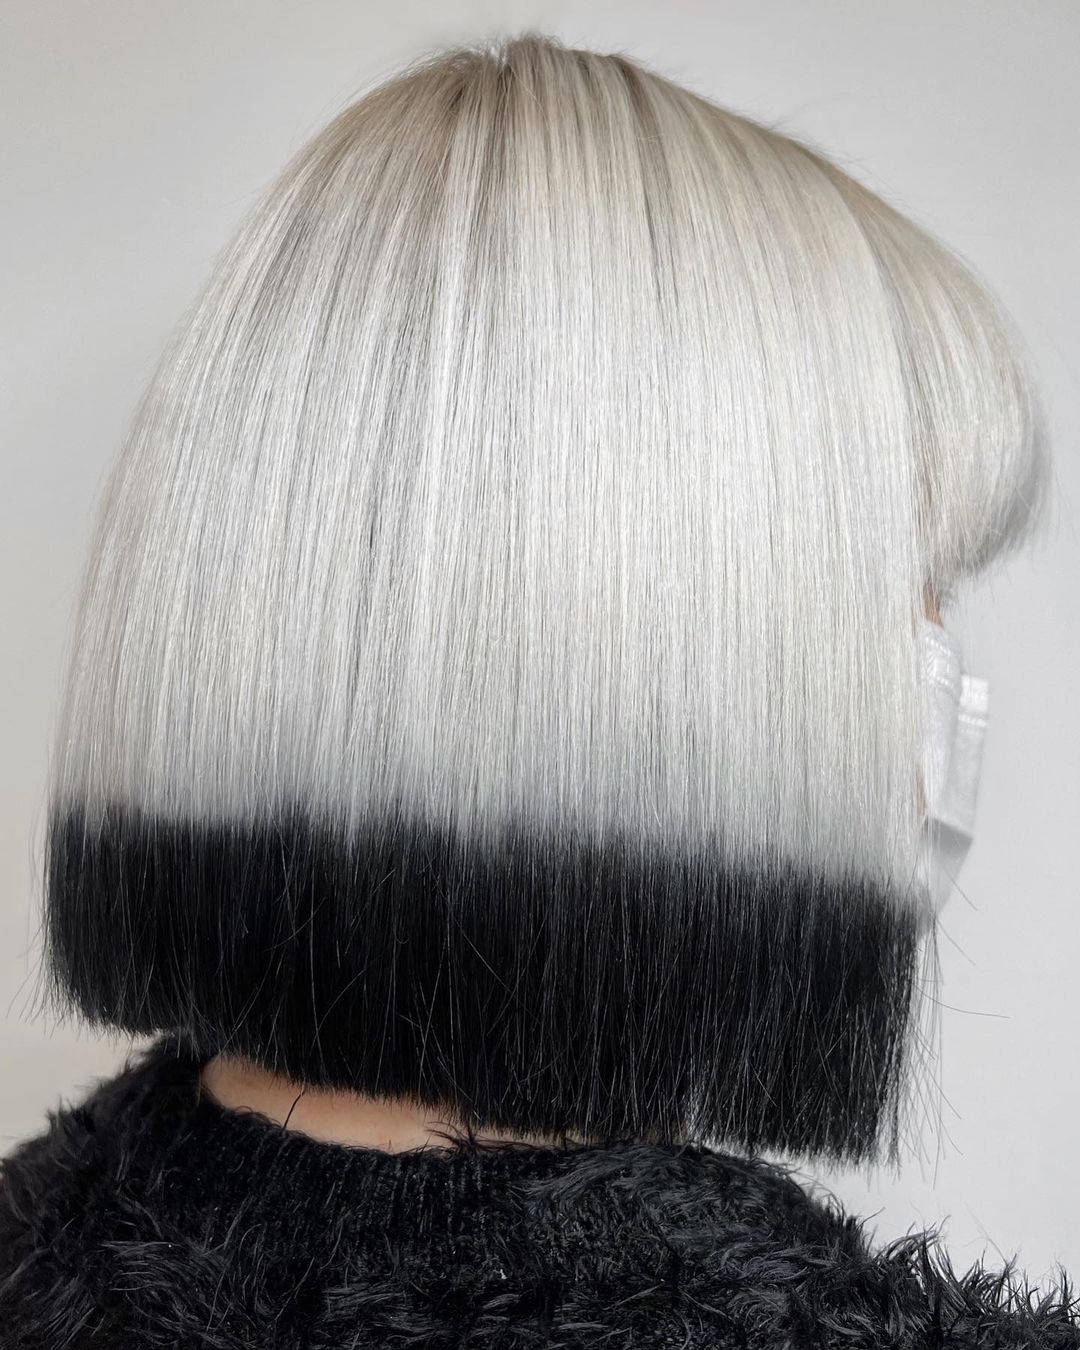 Blonde Hair with Black Ends on Bob Cut